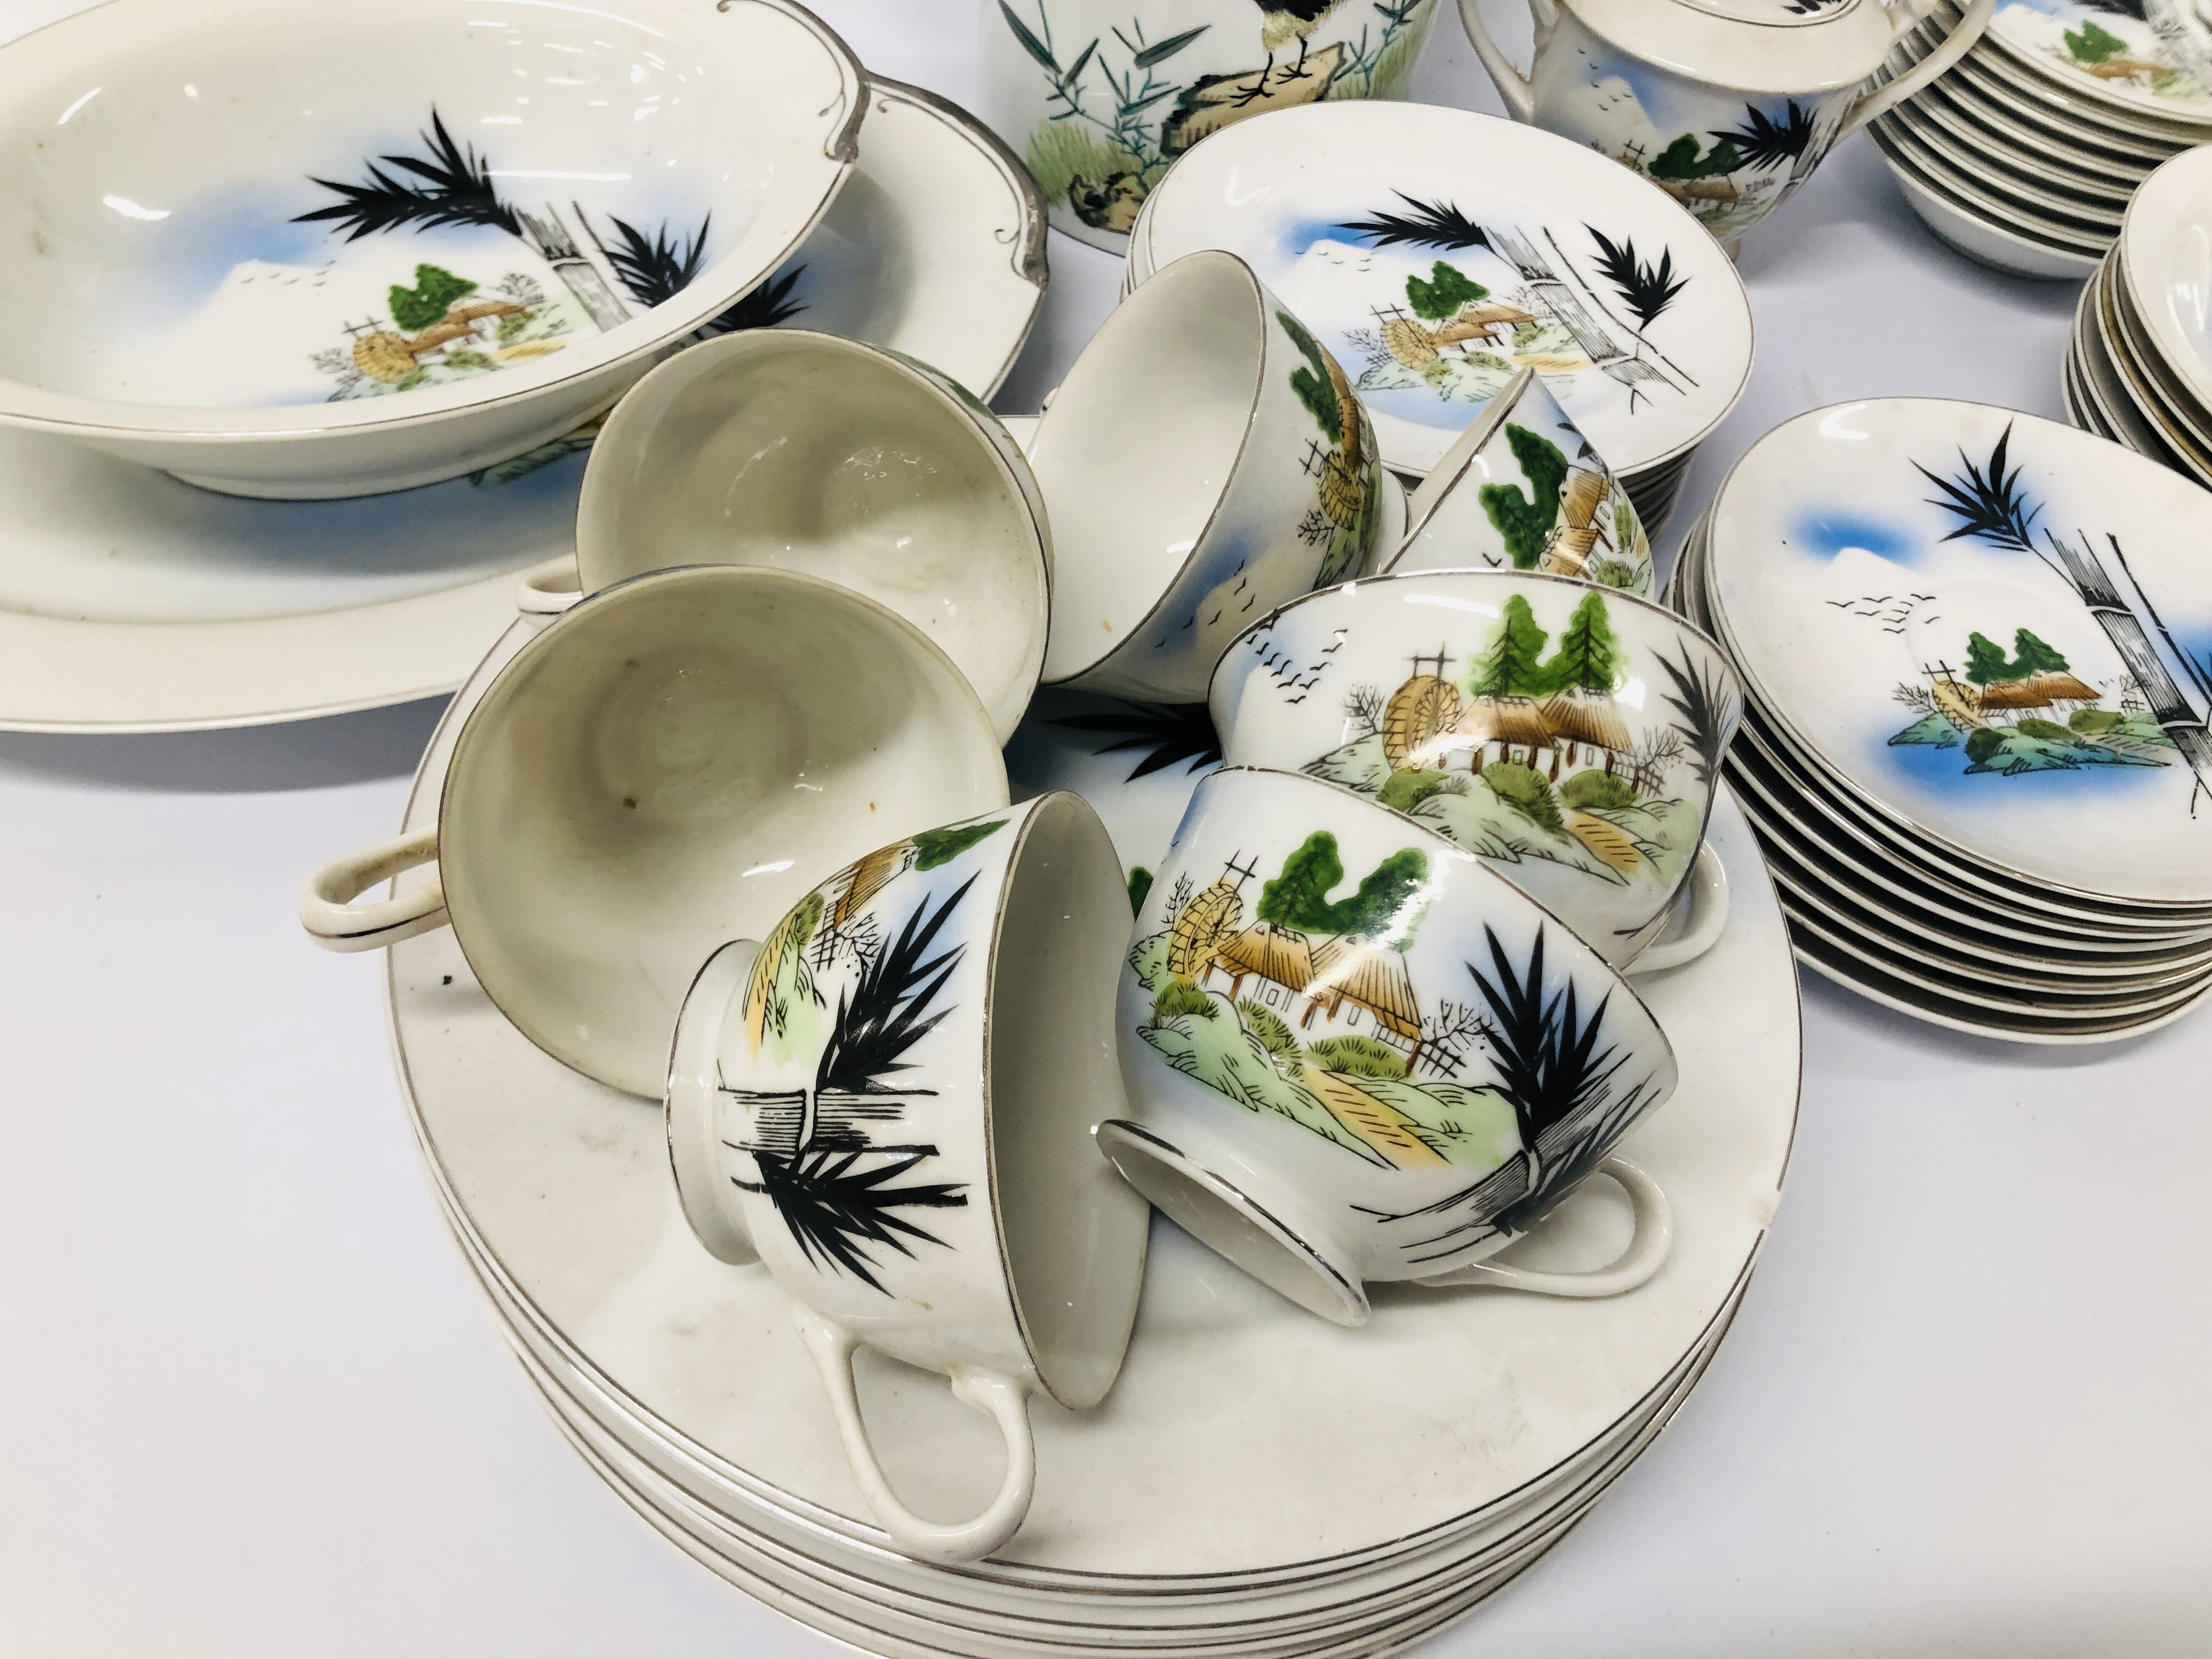 46 PIECES OF E & O CHINA WARE COMPRISING OF PLATES, BOWLS, CUPS AND SAUCERS, SERVING PLATE, - Bild 11 aus 18